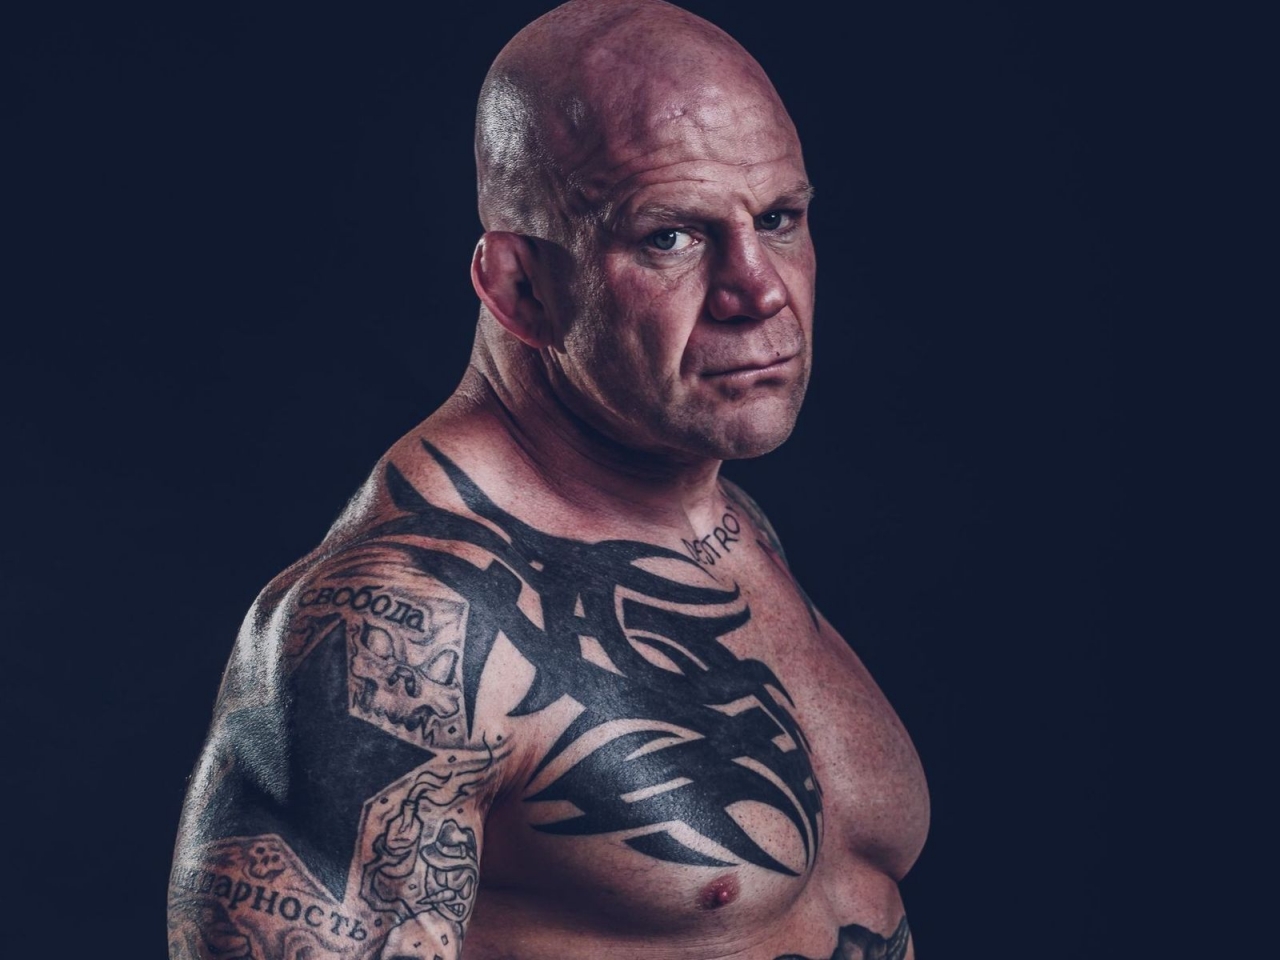 Jeff Monson MMA Fighter for 1280 x 960 resolution